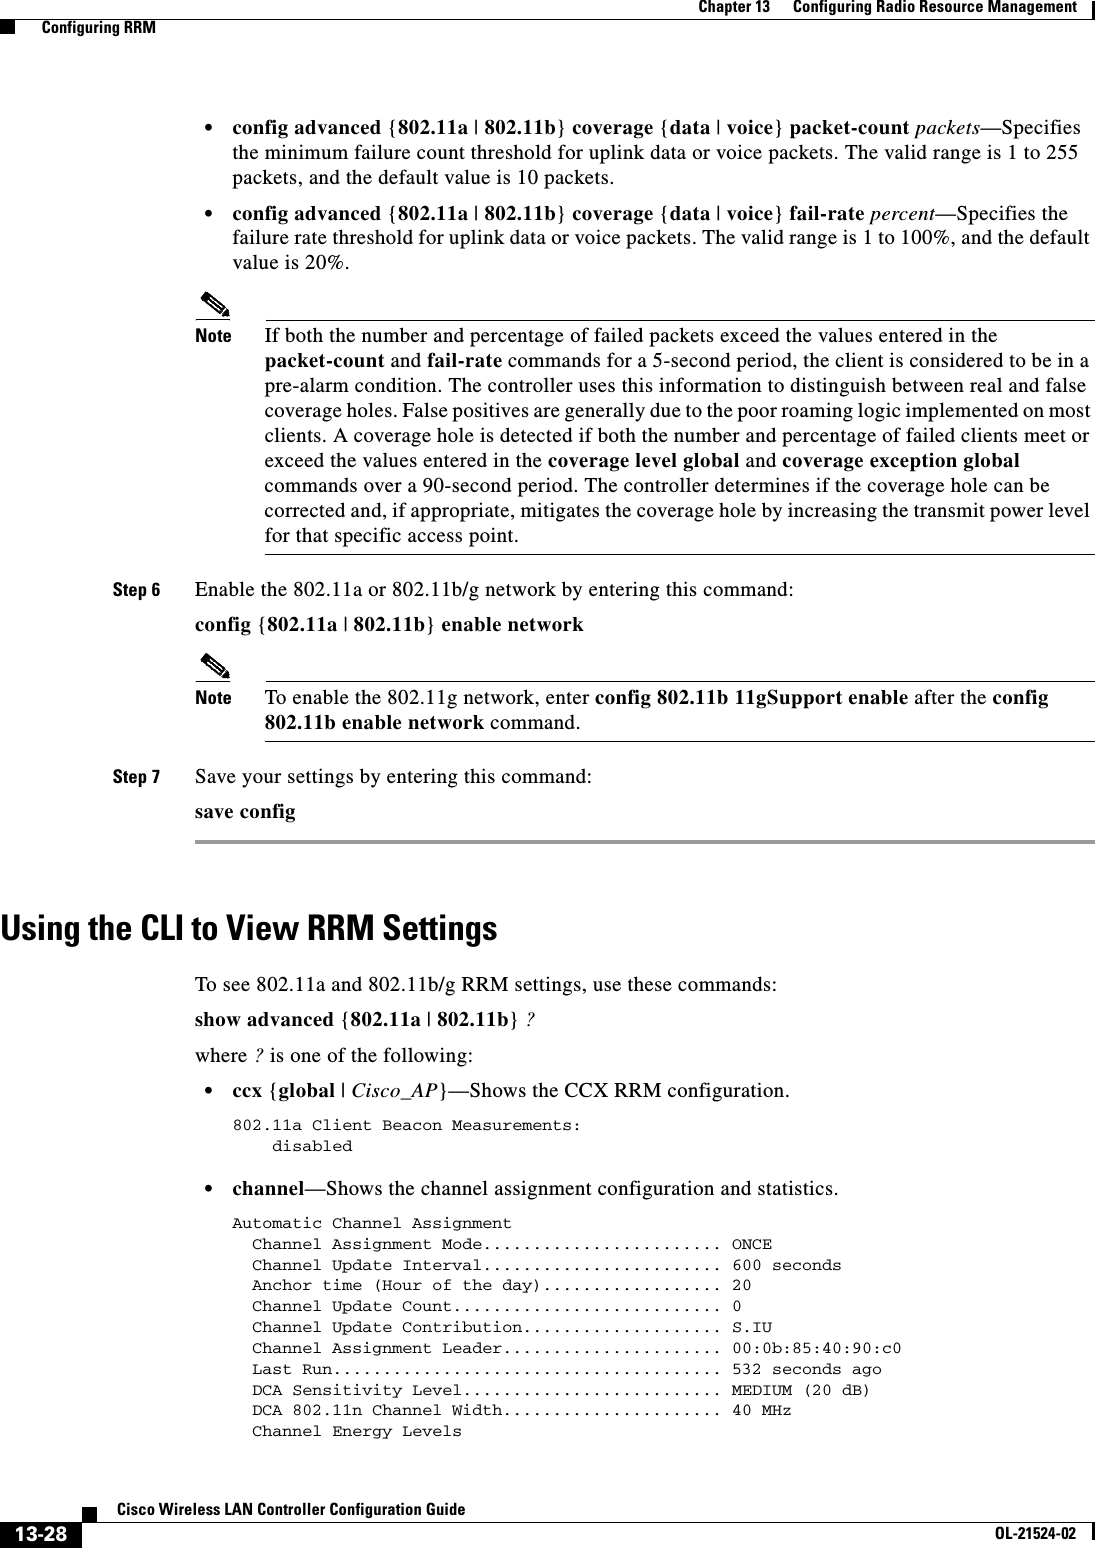  13-28Cisco Wireless LAN Controller Configuration GuideOL-21524-02Chapter 13      Configuring Radio Resource Management  Configuring RRM  • config advanced {802.11a | 802.11b} coverage {data | voice} packet-count packets—Specifies the minimum failure count threshold for uplink data or voice packets. The valid range is 1 to 255 packets, and the default value is 10 packets.  • config advanced {802.11a | 802.11b} coverage {data | voice} fail-rate percent—Specifies the failure rate threshold for uplink data or voice packets. The valid range is 1 to 100%, and the default value is 20%.Note If both the number and percentage of failed packets exceed the values entered in the packet-count and fail-rate commands for a 5-second period, the client is considered to be in a pre-alarm condition. The controller uses this information to distinguish between real and false coverage holes. False positives are generally due to the poor roaming logic implemented on most clients. A coverage hole is detected if both the number and percentage of failed clients meet or exceed the values entered in the coverage level global and coverage exception global commands over a 90-second period. The controller determines if the coverage hole can be corrected and, if appropriate, mitigates the coverage hole by increasing the transmit power level for that specific access point.Step 6 Enable the 802.11a or 802.11b/g network by entering this command:config {802.11a | 802.11b} enable networkNote To enable the 802.11g network, enter config 802.11b 11gSupport enable after the config 802.11b enable network command.Step 7 Save your settings by entering this command:save configUsing the CLI to View RRM SettingsTo see 802.11a and 802.11b/g RRM settings, use these commands:show advanced {802.11a | 802.11b} ?where ? is one of the following:  • ccx {global | Cisco_AP}—Shows the CCX RRM configuration.802.11a Client Beacon Measurements:    disabled   • channel—Shows the channel assignment configuration and statistics.Automatic Channel Assignment  Channel Assignment Mode........................ ONCE  Channel Update Interval........................ 600 seconds  Anchor time (Hour of the day).................. 20  Channel Update Count........................... 0  Channel Update Contribution.................... S.IU  Channel Assignment Leader...................... 00:0b:85:40:90:c0  Last Run....................................... 532 seconds ago  DCA Sensitivity Level.......................... MEDIUM (20 dB)  DCA 802.11n Channel Width...................... 40 MHz  Channel Energy Levels